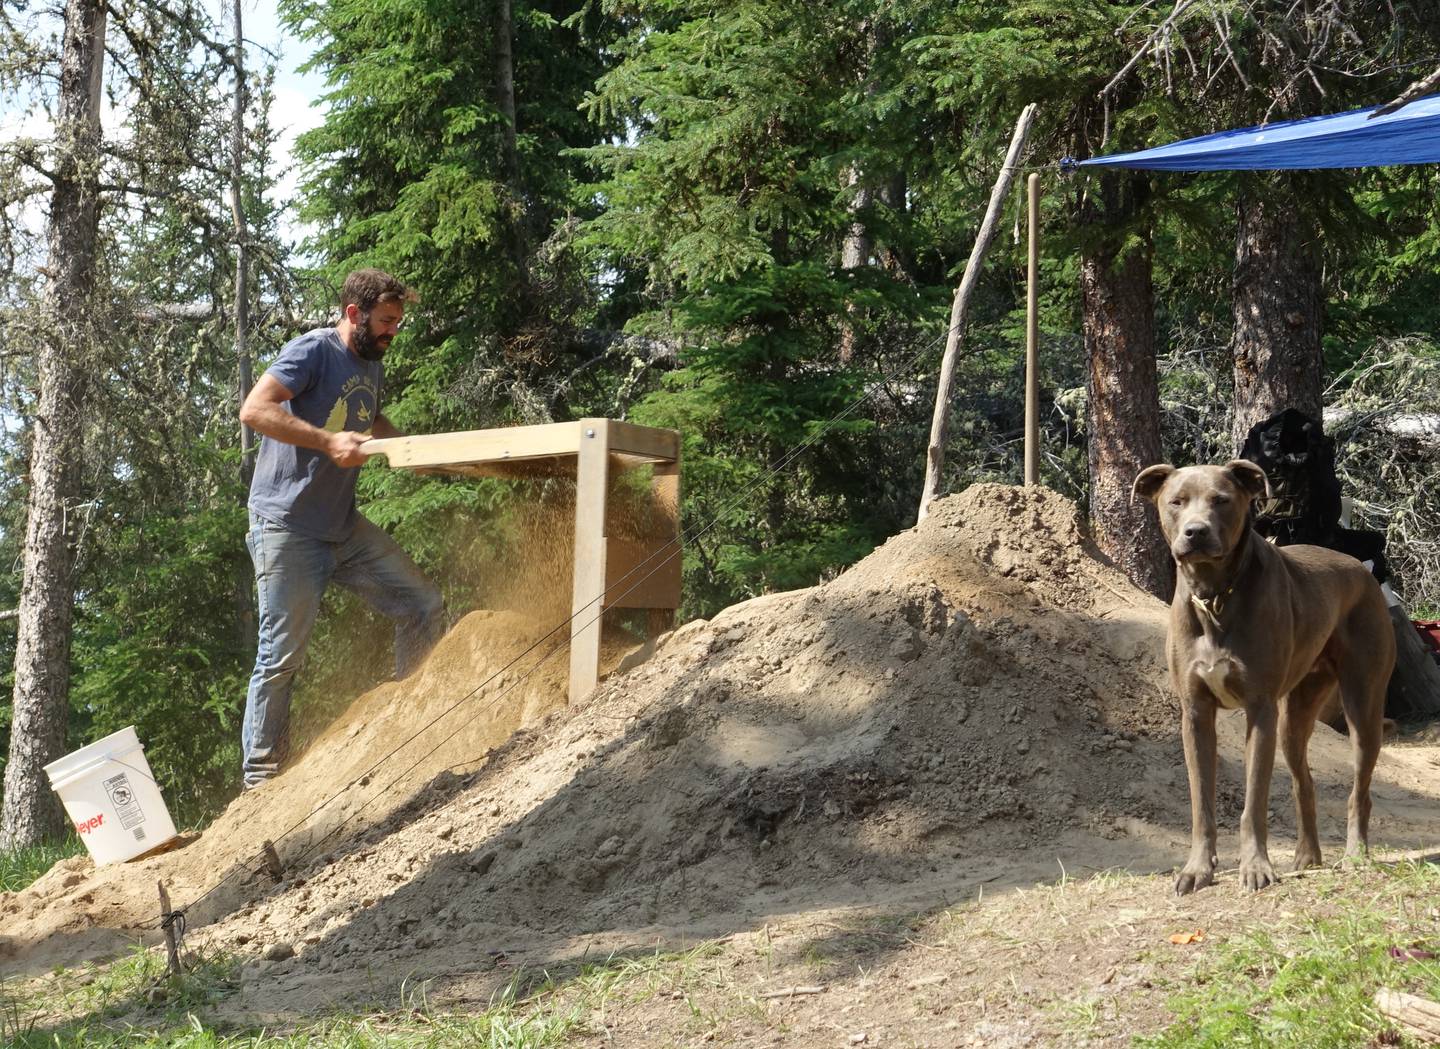 University of Alaska Anchorage archaeologist Gerad Smith sifts through soil troweled from a site on top of Hollembaek Hill in Delta Junction. His dog Blue looks on. (Photo by Ned Rozell)